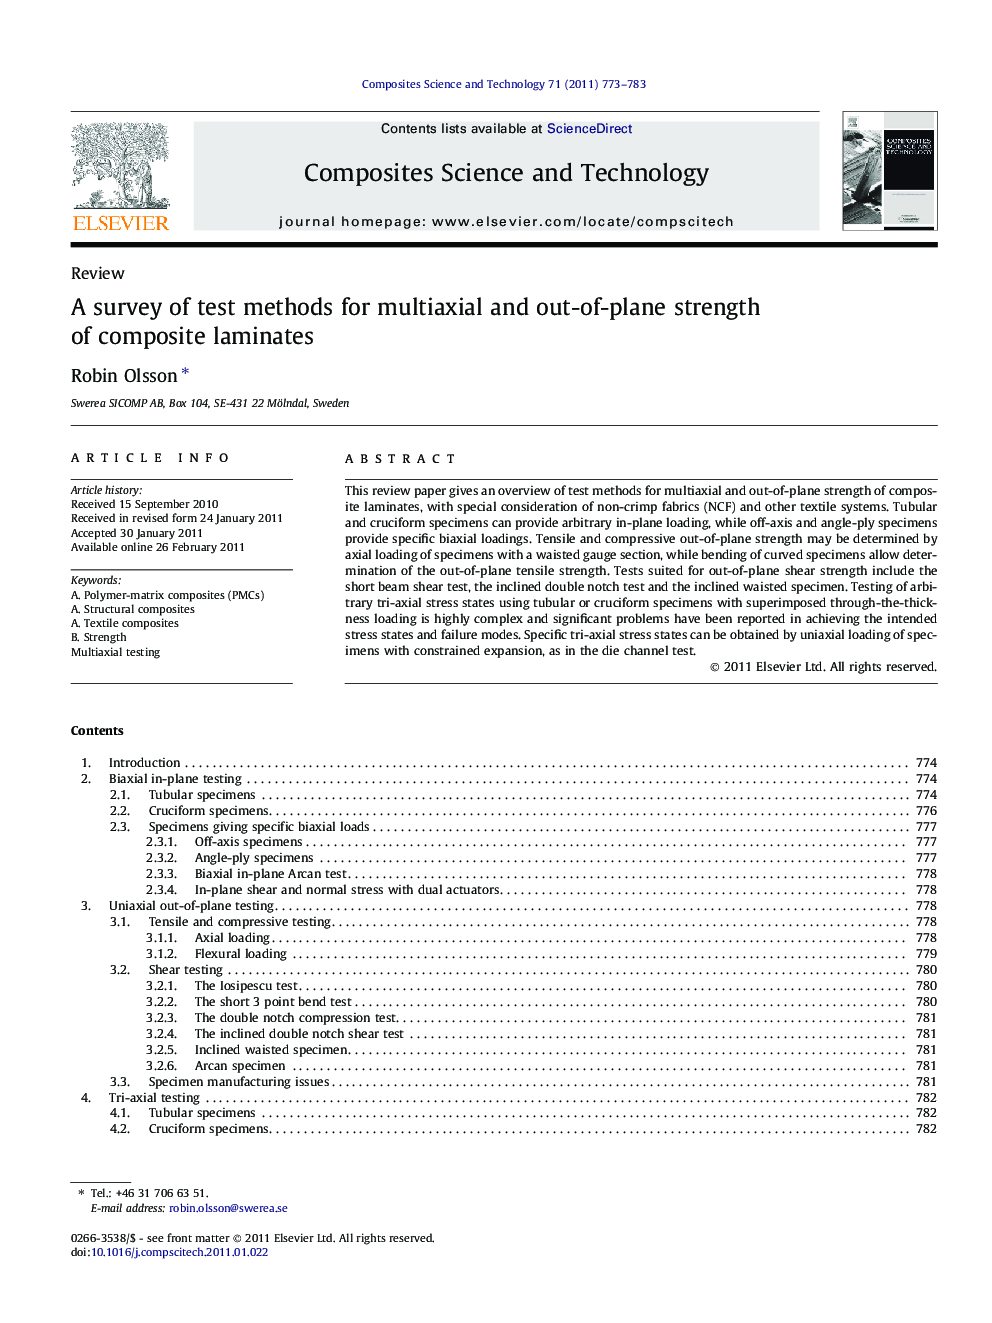 A survey of test methods for multiaxial and out-of-plane strength of composite laminates